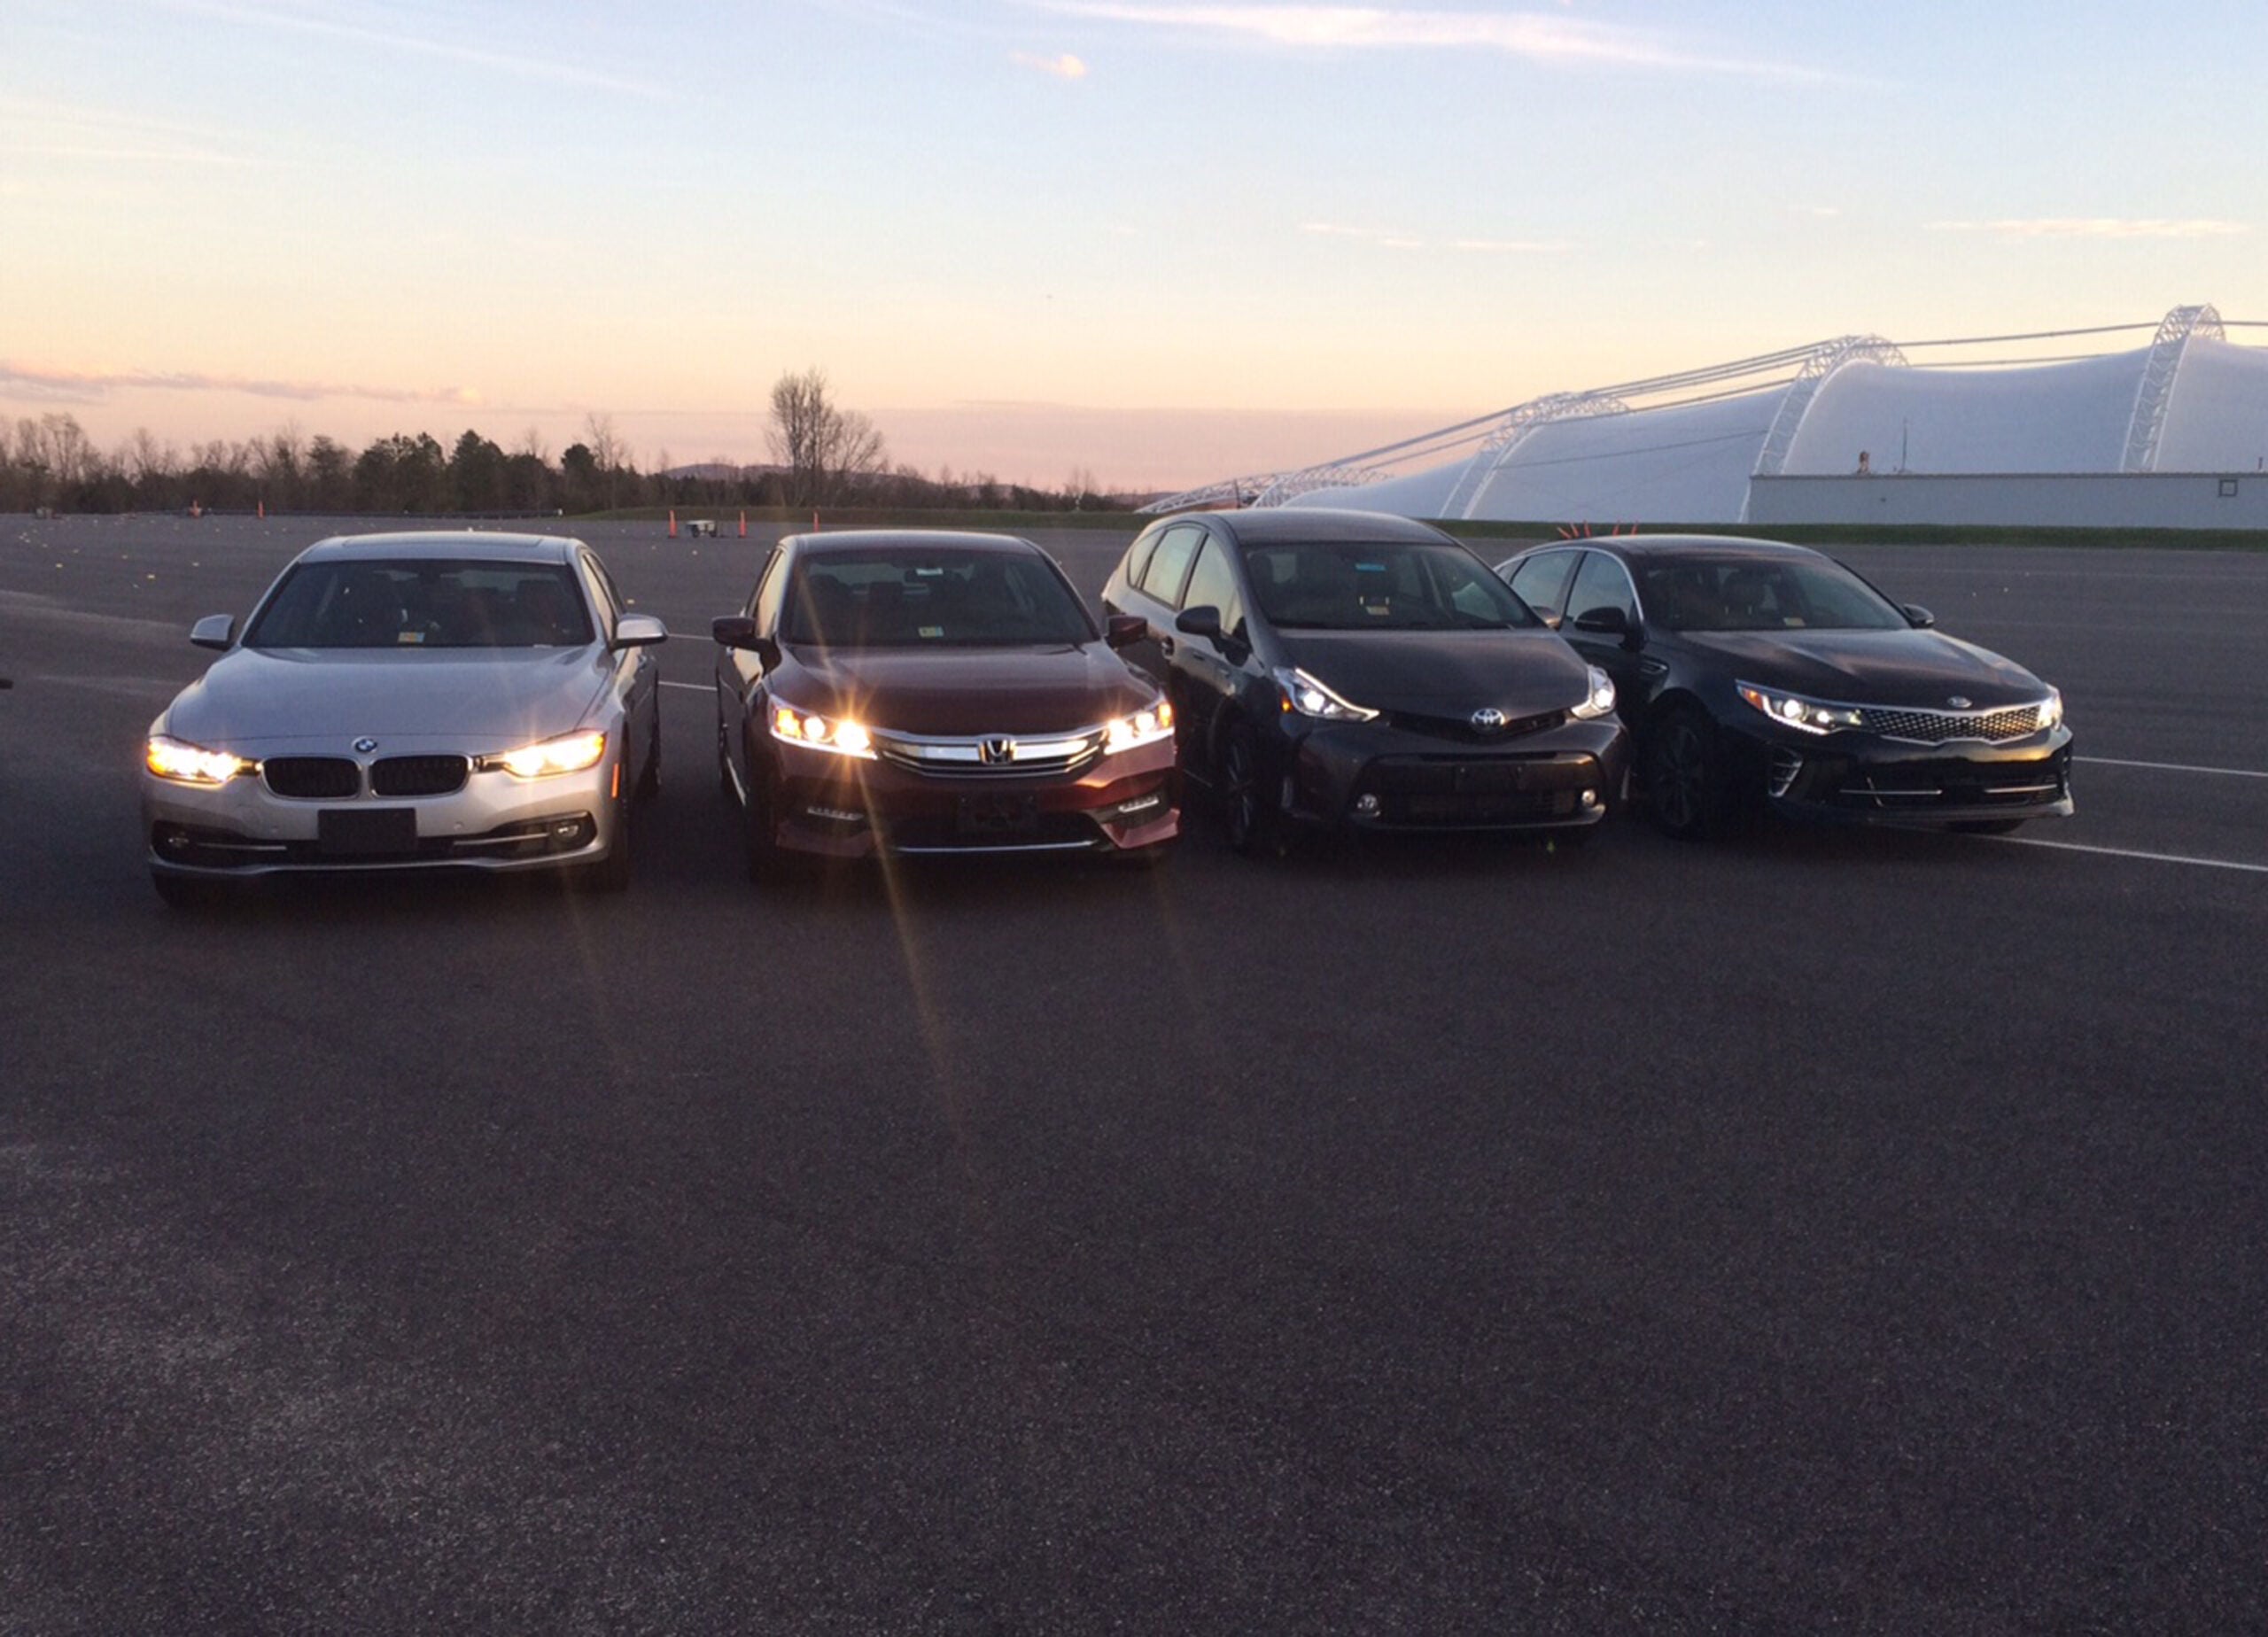 EMBARGOED UNTIL 12:01 A.M., WEDNESDAY, MARCH 30, 2016 - In this photo provided by the The Insurance Institute for Highway Safety, from left, a BMW 3 series, Honda Accord, Toyota Prius V and a Kia Optima are seen at the institutes Vehicle Research Center in Ruckersville, Va. A new study that rates the headlights of more than 30 midsized car models found only one model earned a good rating. Of the rest, half were rated acceptable and half were rated poor. The difference between the top-rated and bottom-rated model in terms of a drivers ability to see down a dark road was substantial. (Russ Rader/Insurance Institute for Highway Safety via AP)